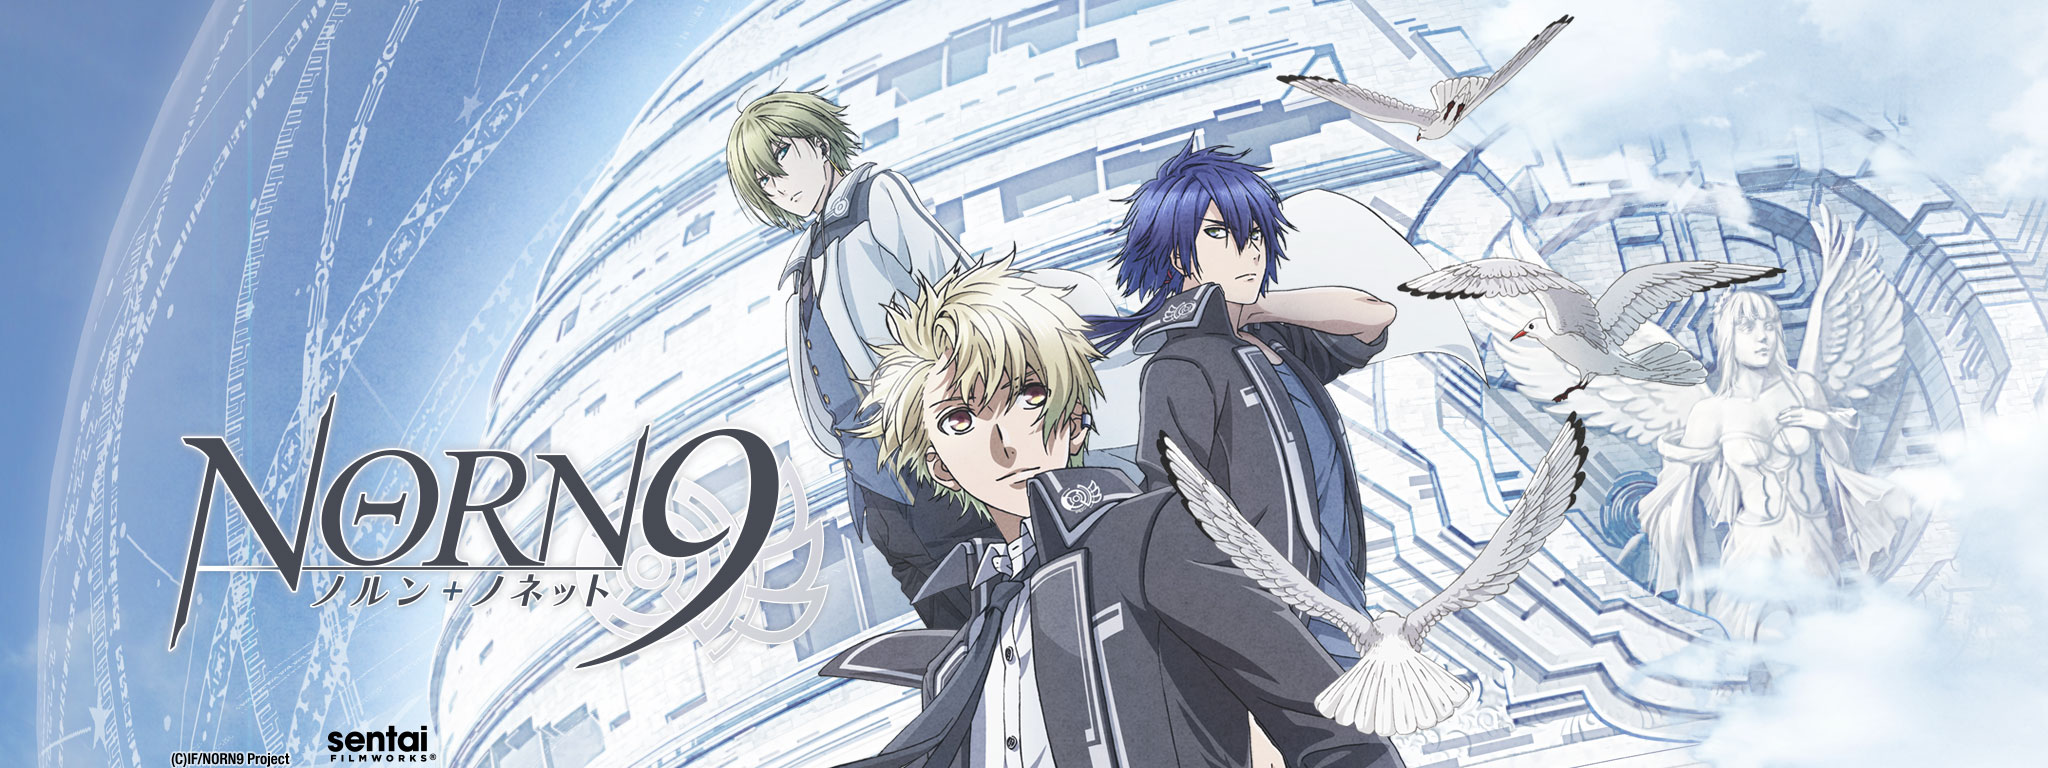 Title Art for Norn9